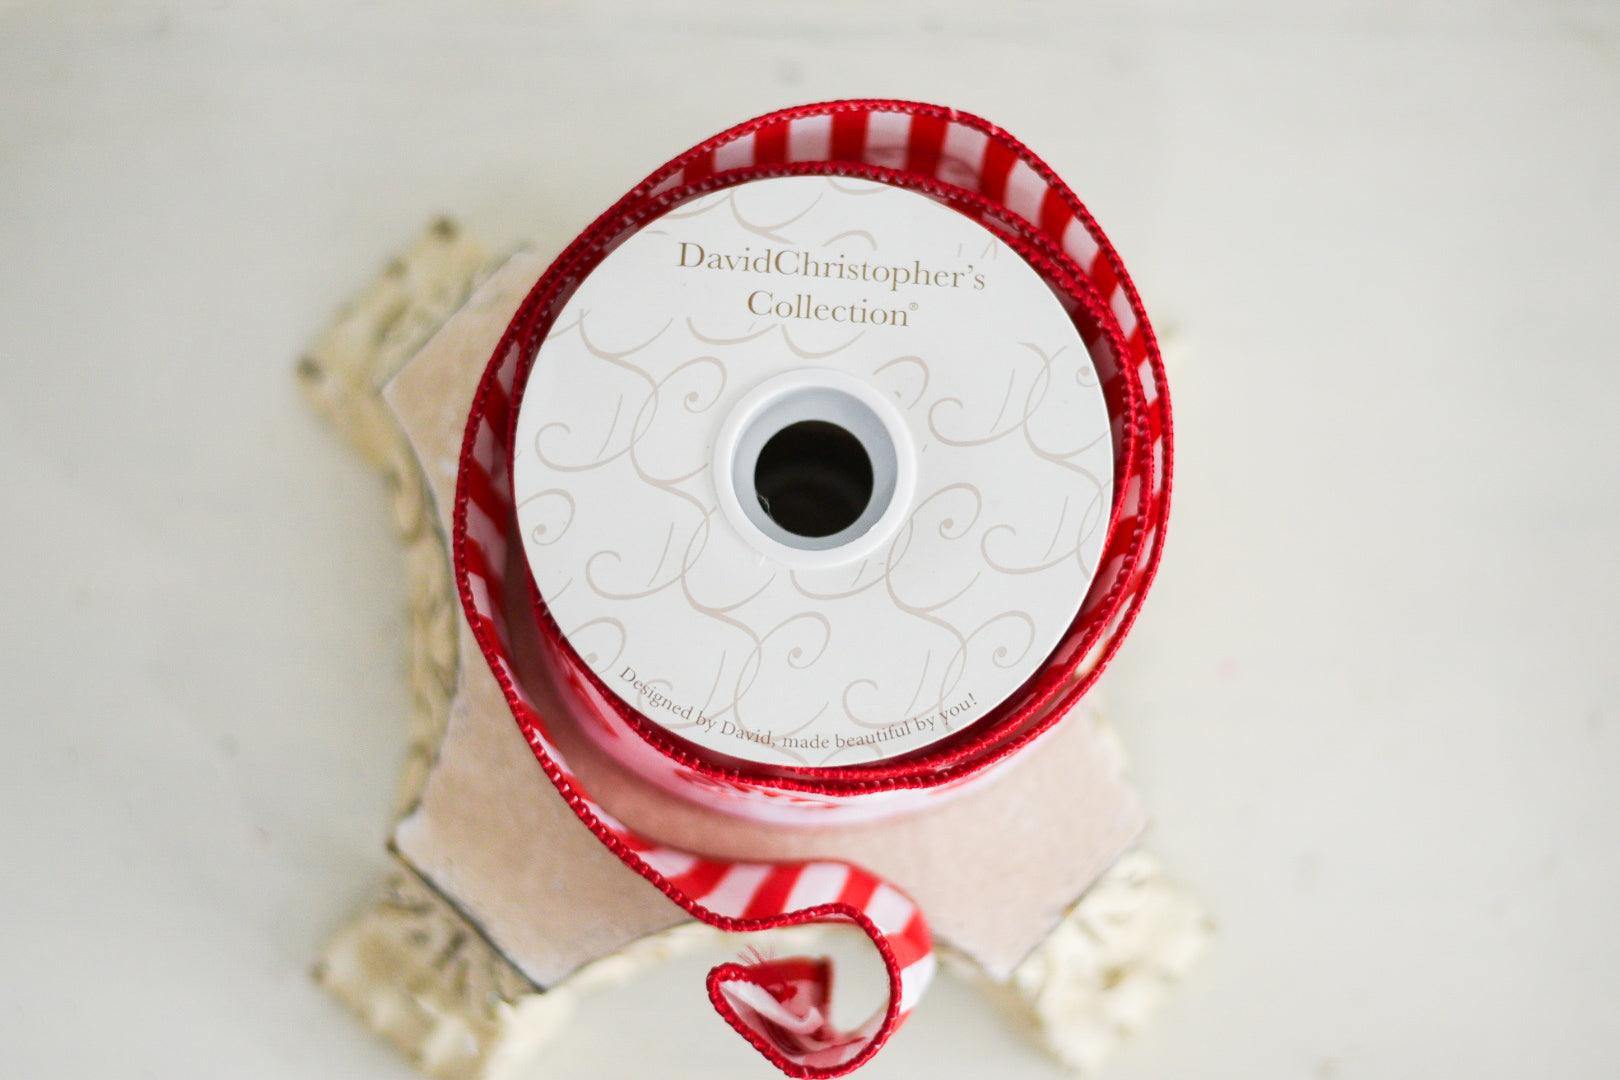 Peppermint Swirl Candy Ribbon w/ Striped Backing 4inX10YD - Burlap and Bling Decor